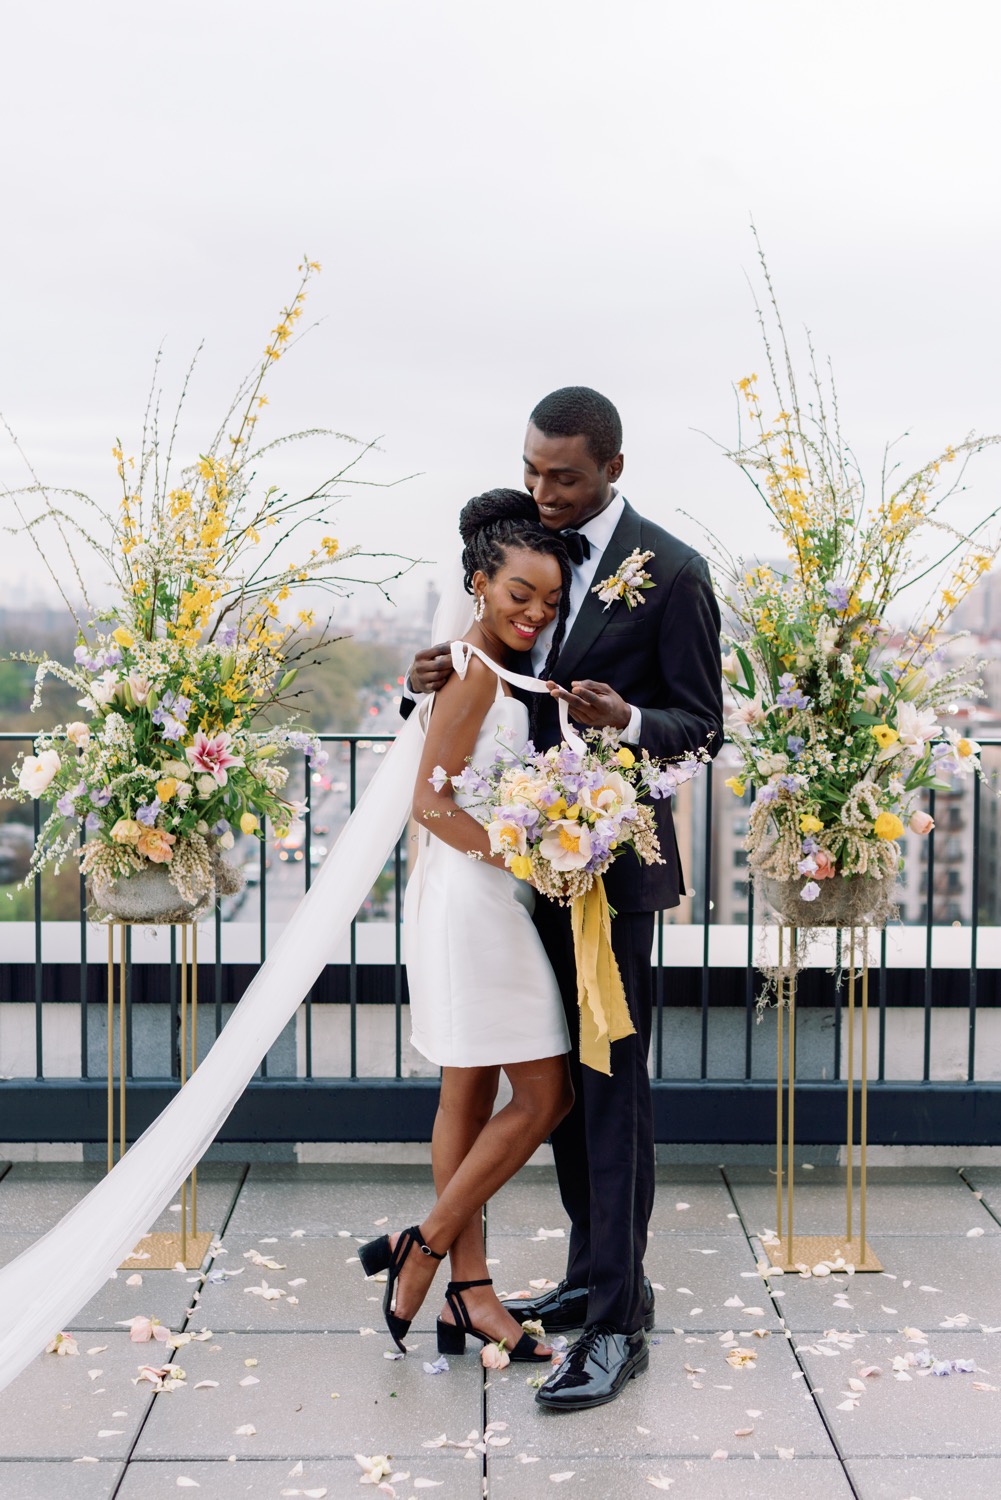 Bride and groom embrace on balcony with bouquet and flower stands over NYC backdrop real wedding alexandra grecco mini dress odette